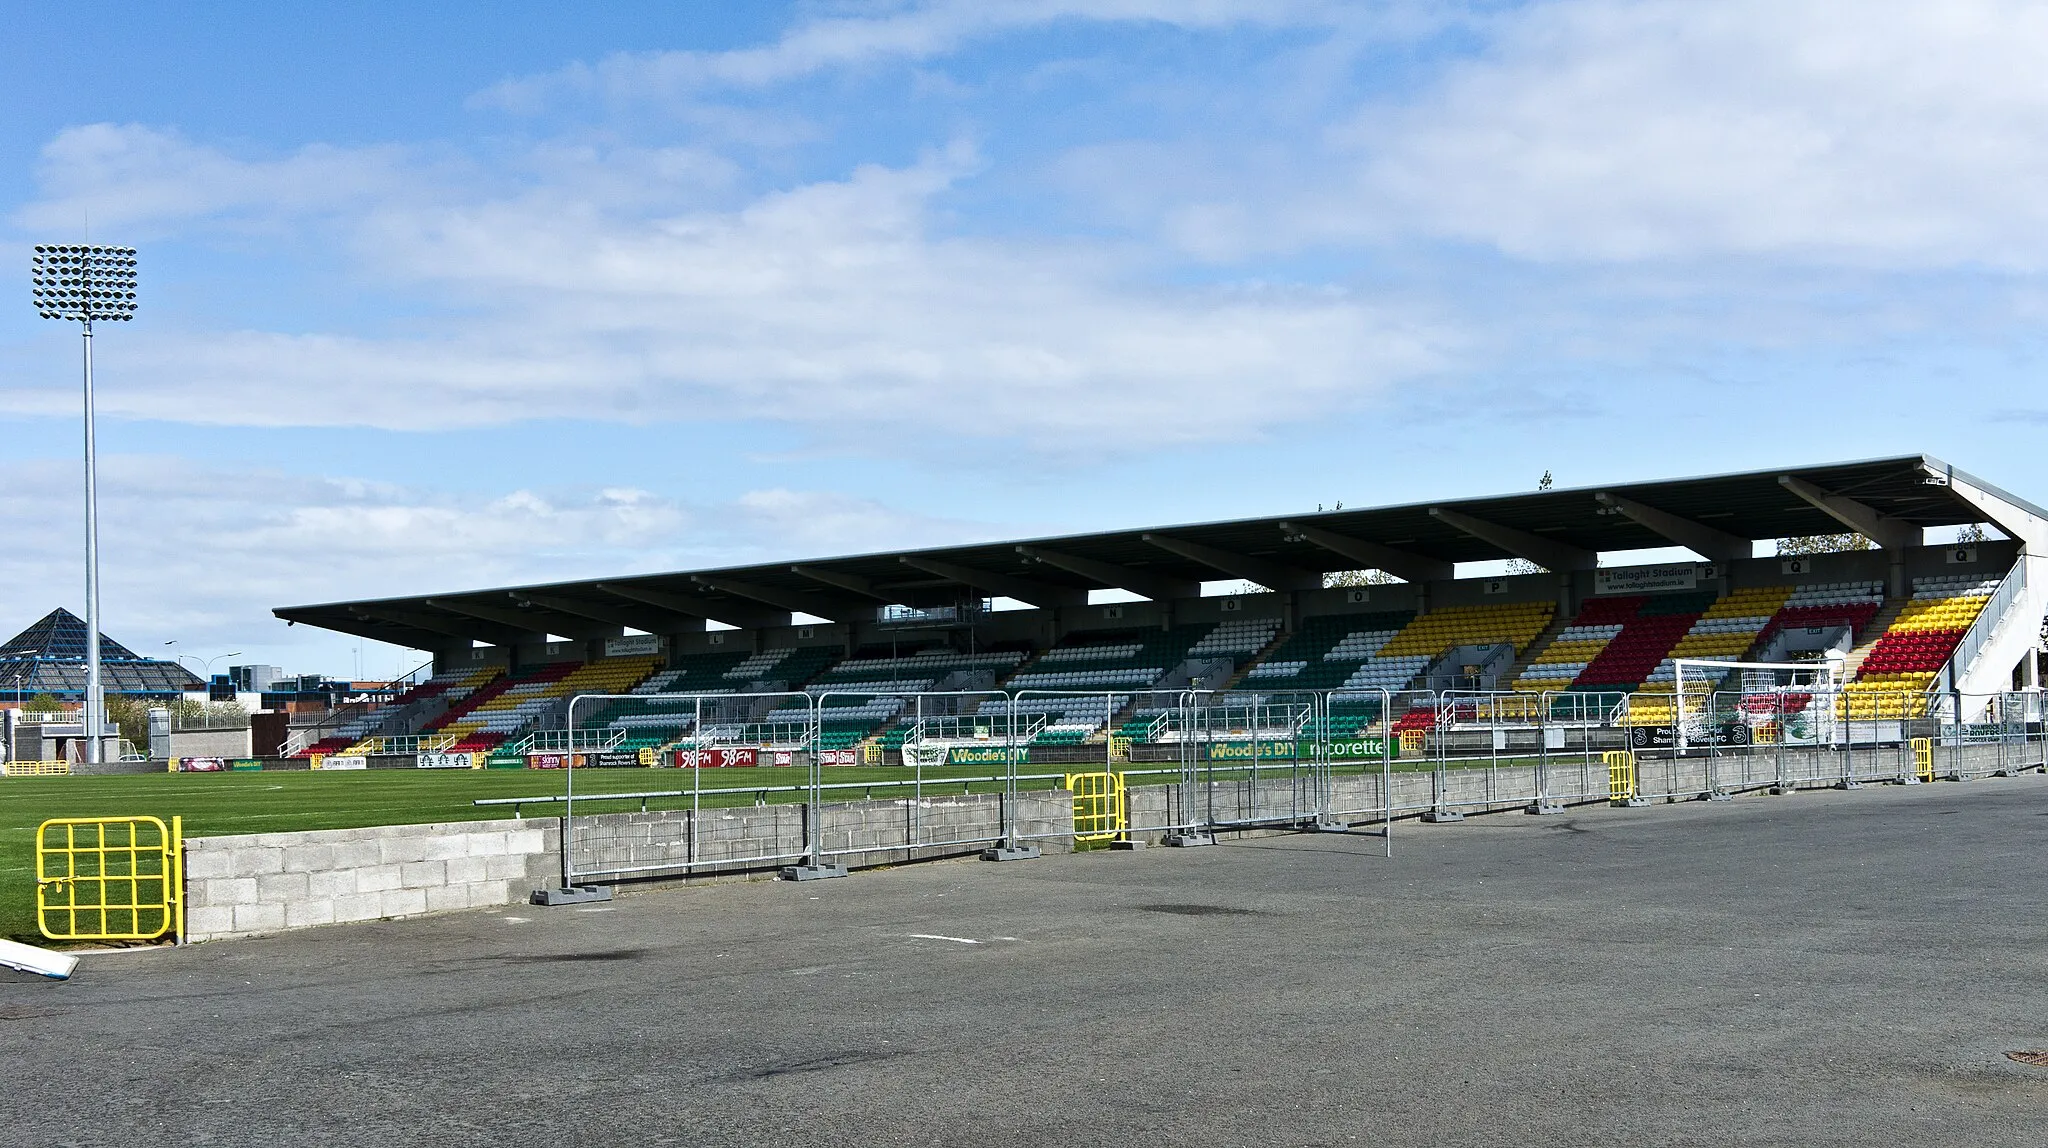 Photo showing: Tallaght Stadium is a football stadium in the Southside suburb of Tallaght. Shamrock Rovers originally announced details of the stadium back in July 1996.
The stadium is owned and operated by South Dublin County Council with Shamrock Rovers as the anchor tenants.
The main stand seats 3,048 and holds home supporters, away supporters, club officials and press. A second stand seating 2,899 on the opposite (east) side of the ground, was completed in August 2009. This stand holds the stadium's TV gantry and has brought the seating capacity to 5,947. Both stands are covered. There are no stands currently in place behind the goals. Refreshment stalls are located at the southern end as is a stadium control room.
Temporary seating has twice been constructed at the stadium. Once for a club friendly against Real Madrid which gave the ground a temporary capacity of 10,900 and again before the 2009 FAI Cup Final, giving the ground a temporary capacity of 8,800.

Located behind the main stand is the Shamrock Rovers club shop jointly operated by Rovers and kit suppliers Umbro. Also onsite at the stadium is the 'Glenmalure Suite' open to club members on match days.